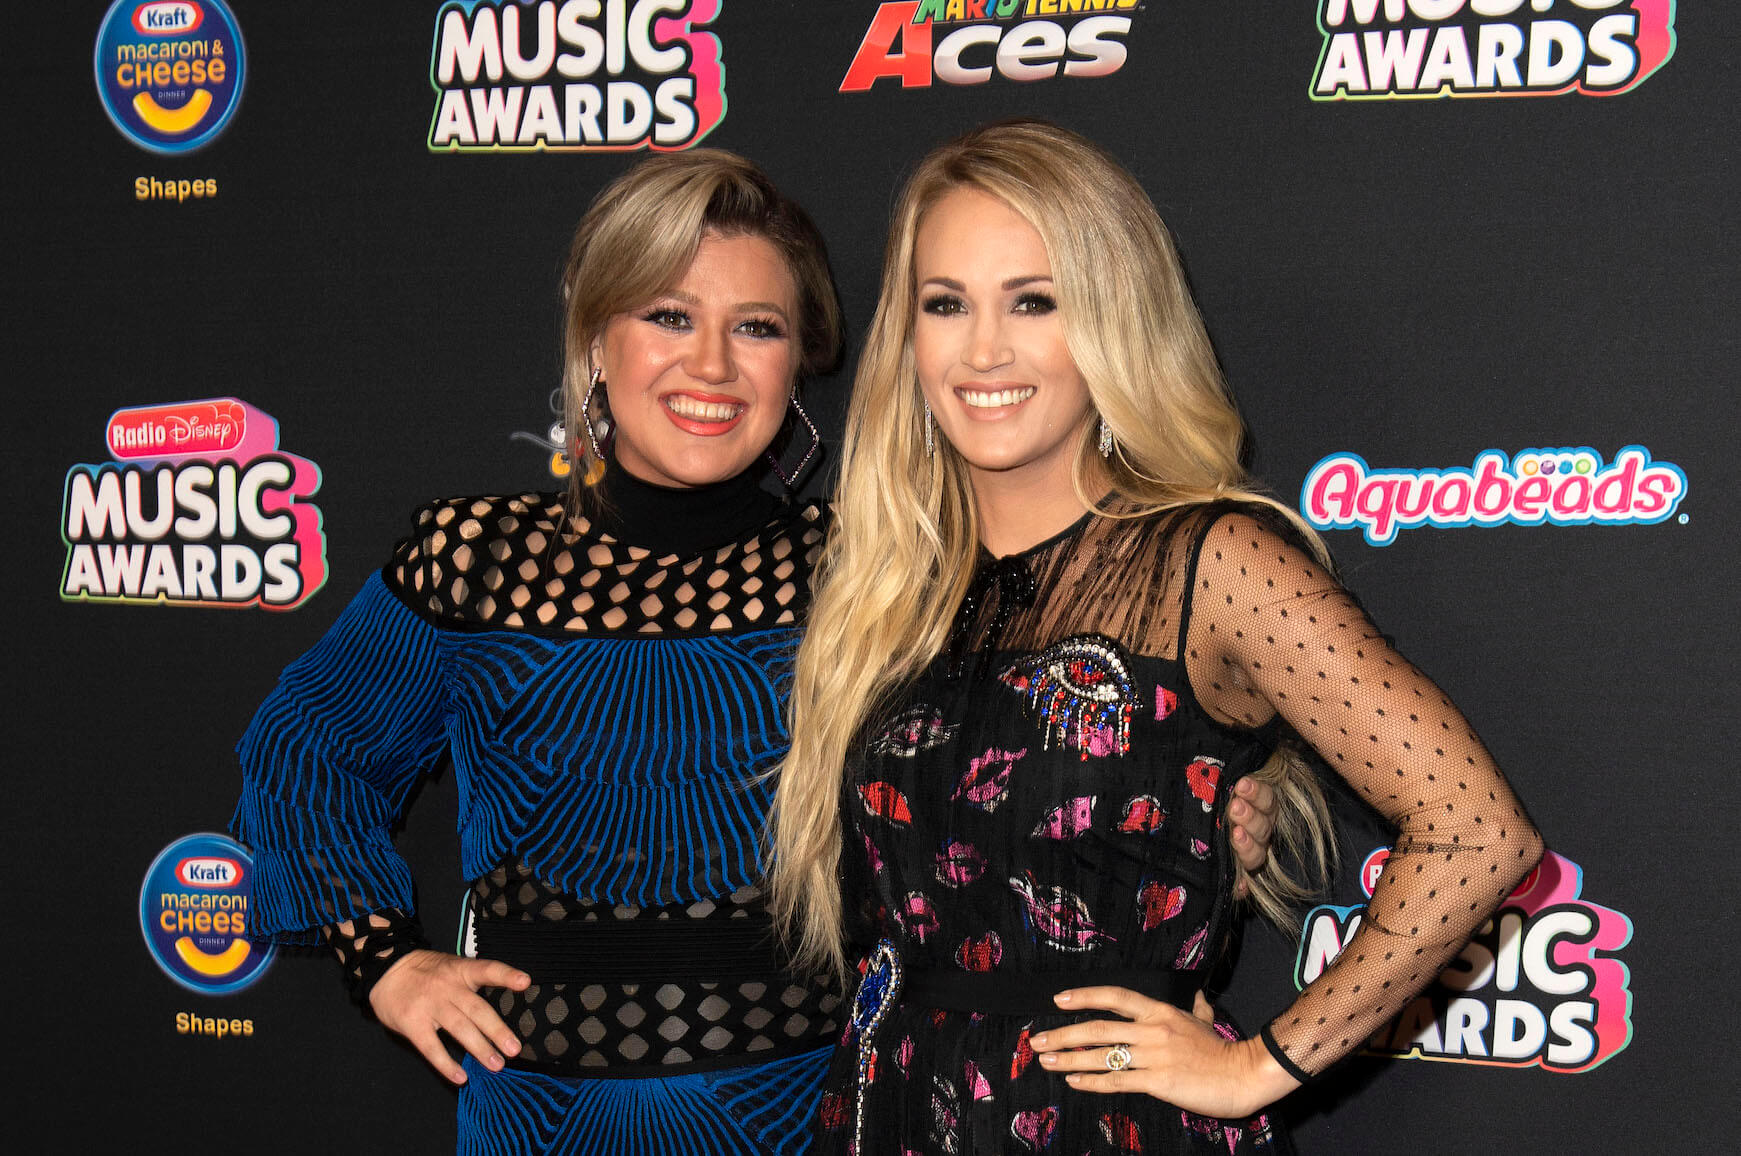 'The Voice' coach Kelly Clarkson and 'American Idol' alumnus Carrie Underwood standing together and hugging